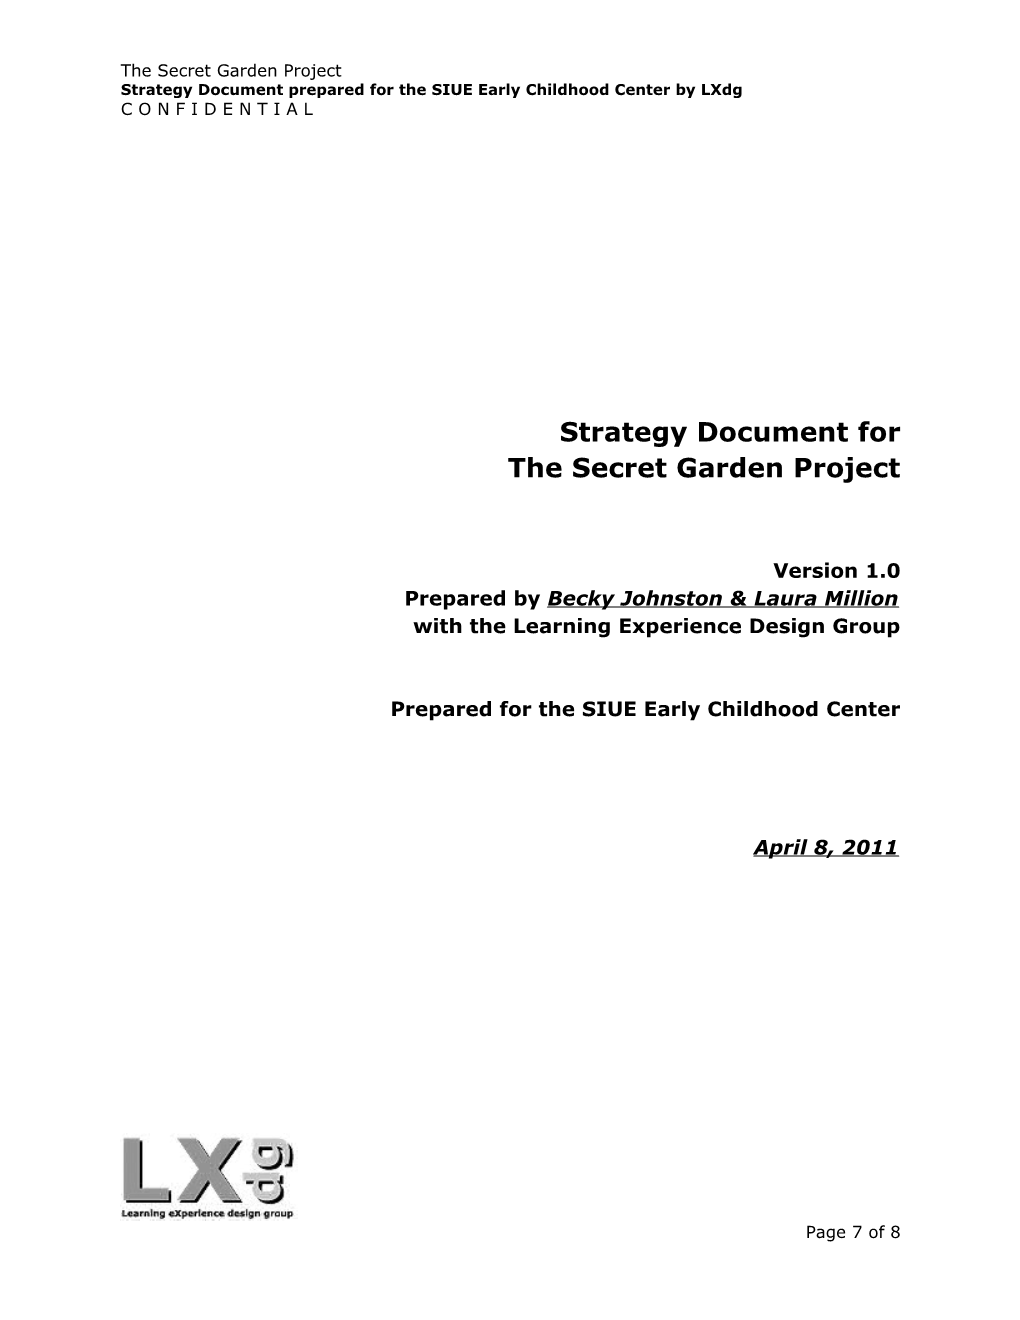 Strategy Document Prepared for the SIUE Early Childhood Center by Lxdg